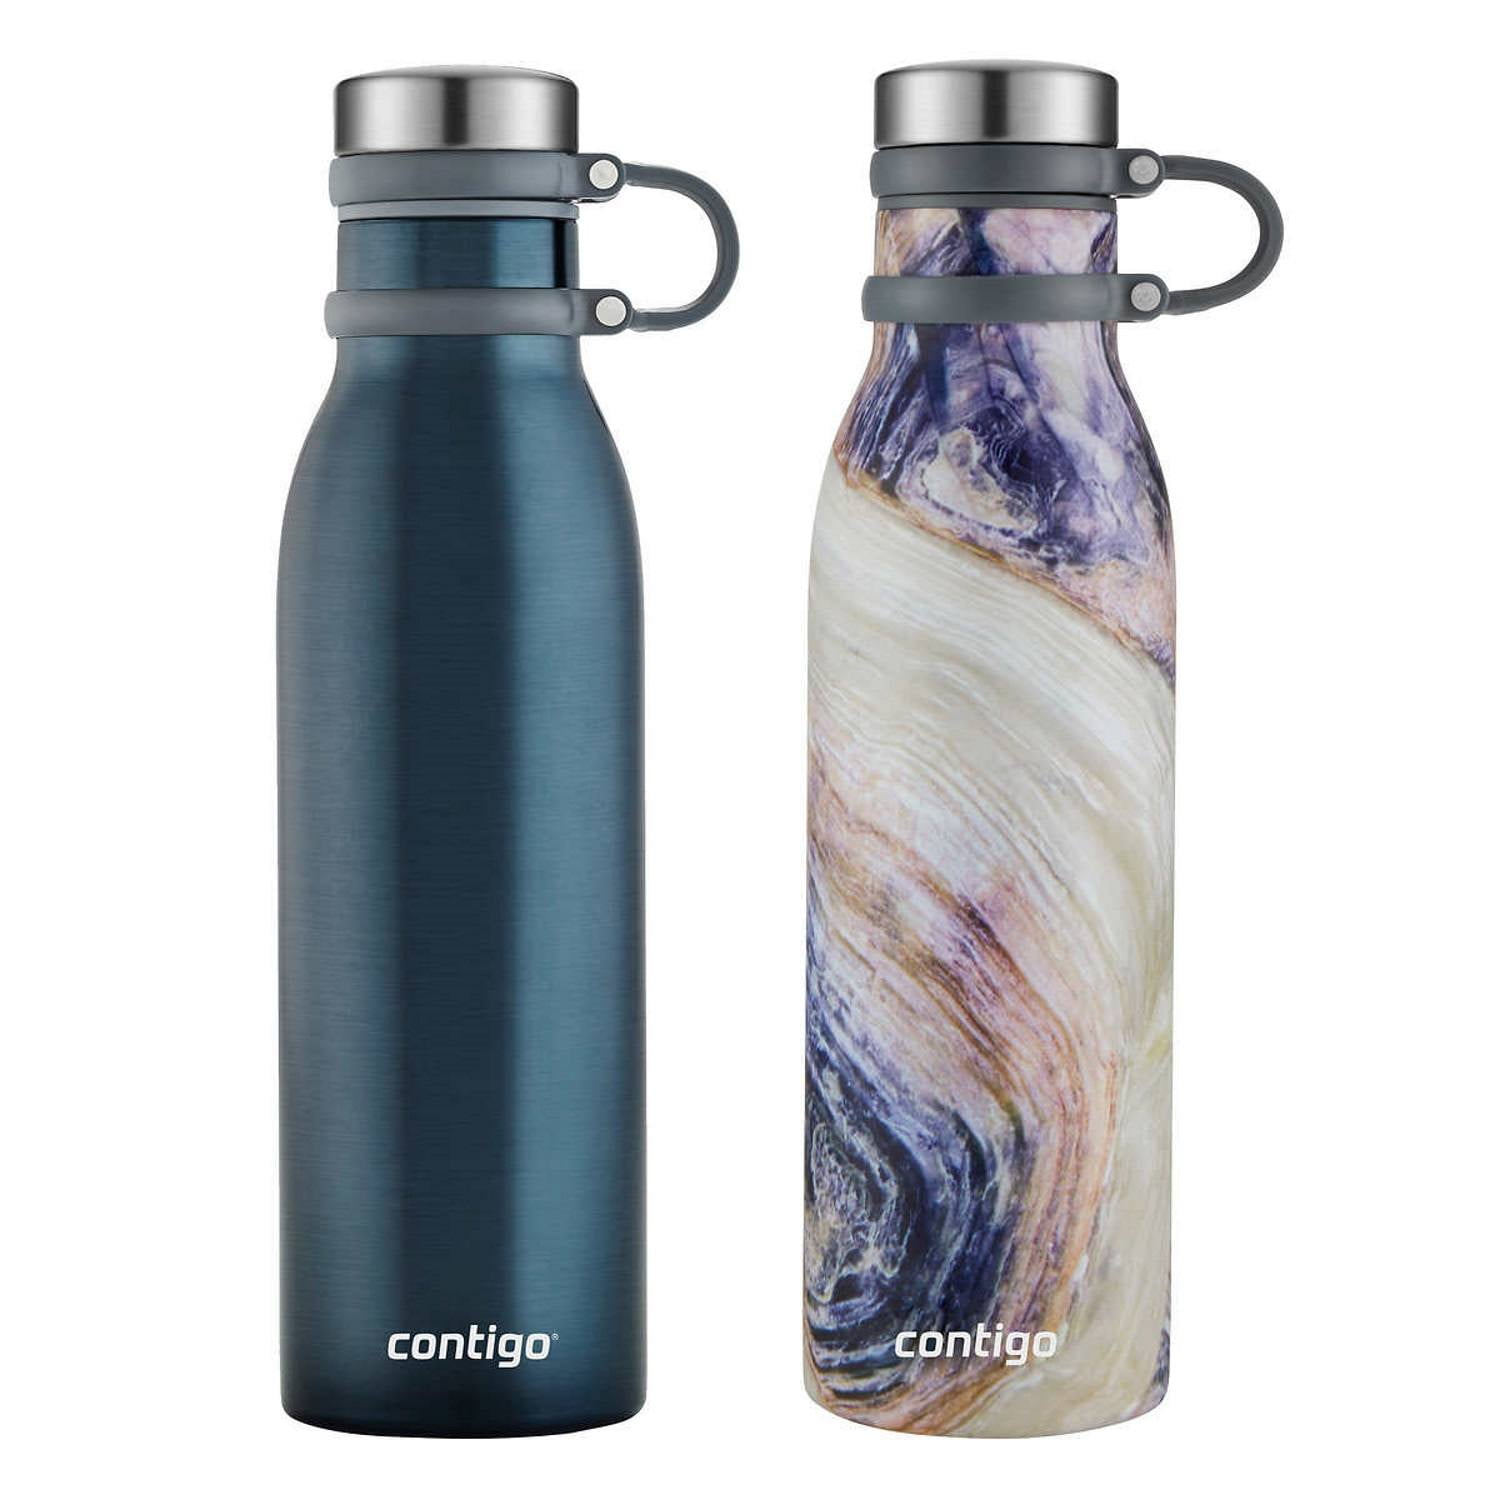 Bargains by Green - Contigo Autoseal Couture 20oz Vacuum Insulated  Stainless Steel Water Bottle, 2-pack $15 Contigo Autoseal Couture 20oz  Vacuum Insulated Stainless Steel Water Bottle, 2-pack New Retail:$25.00  Color: Green Spill